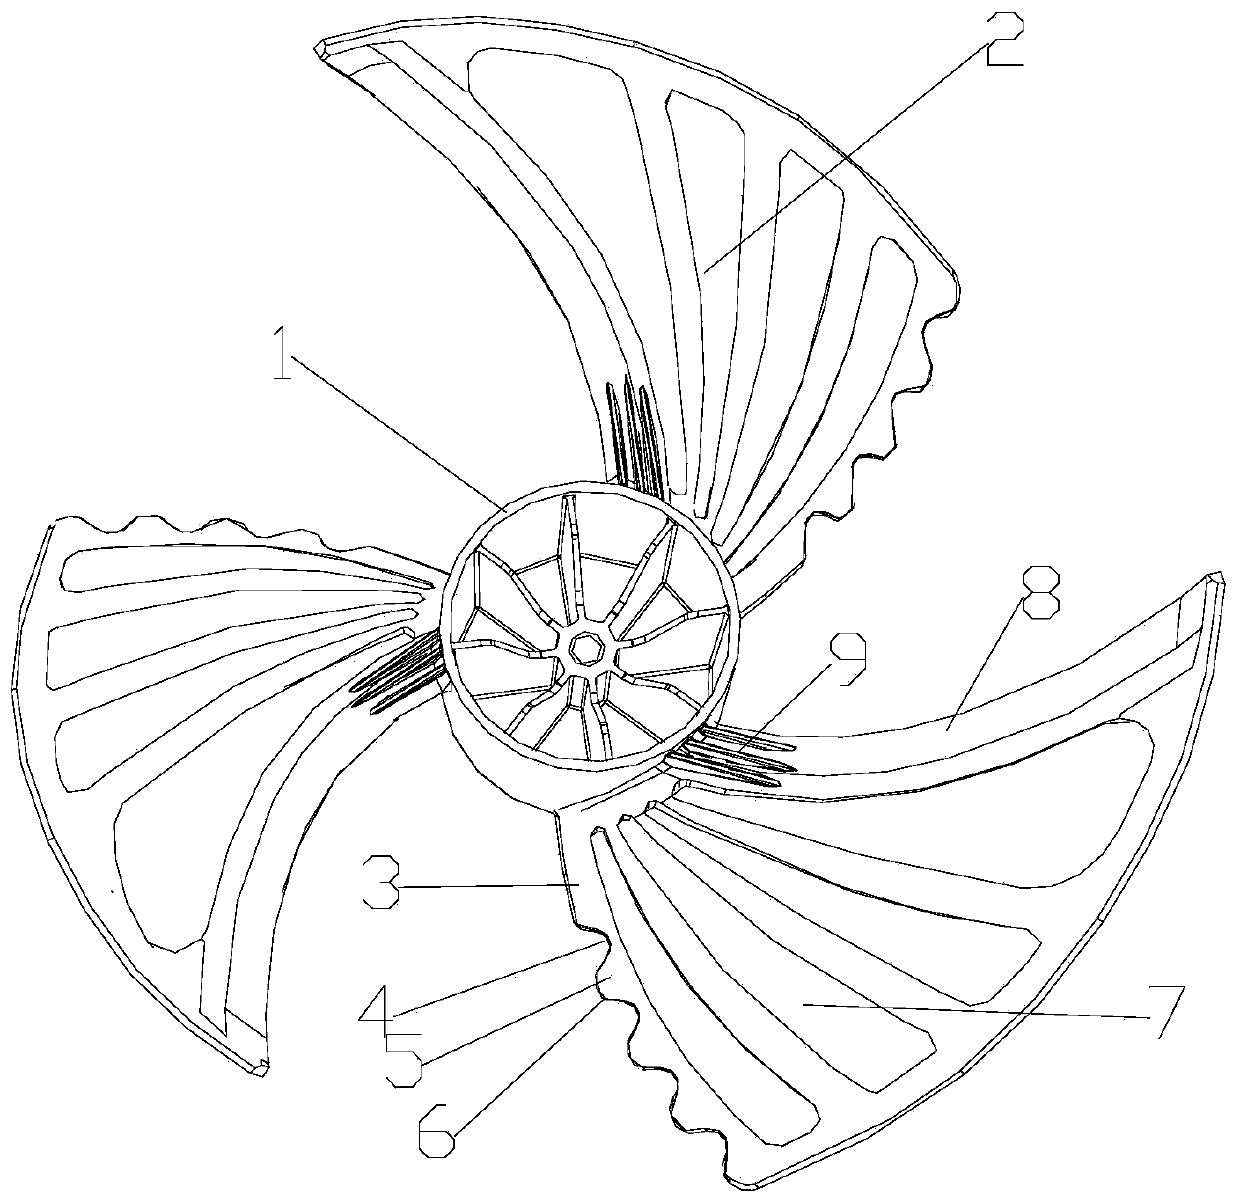 Axial flow fan blade and fan with the same